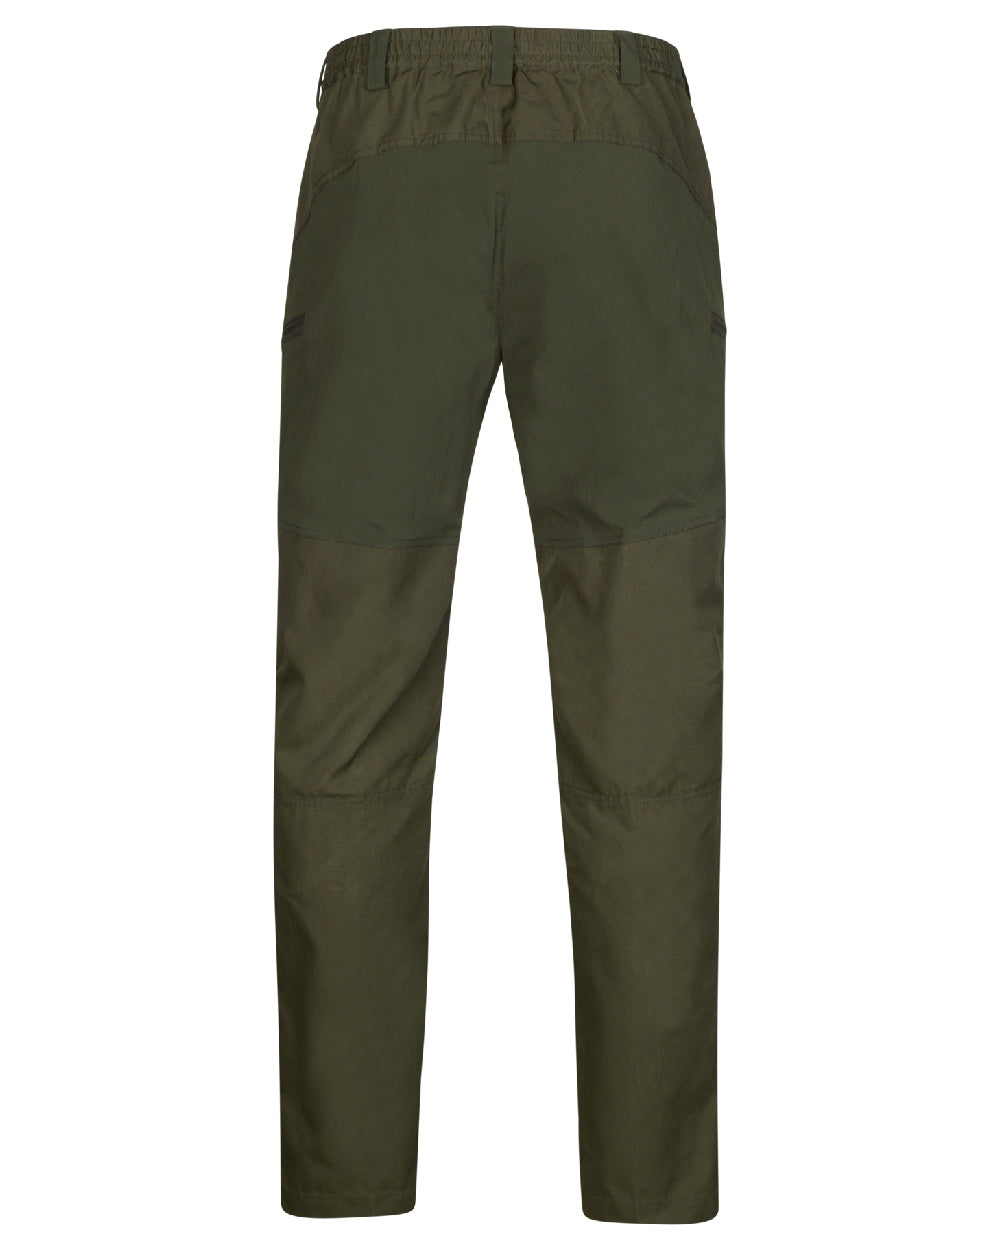 Forest Night/Rosin coloured Harkila Fjell Trousers on white backgroun 